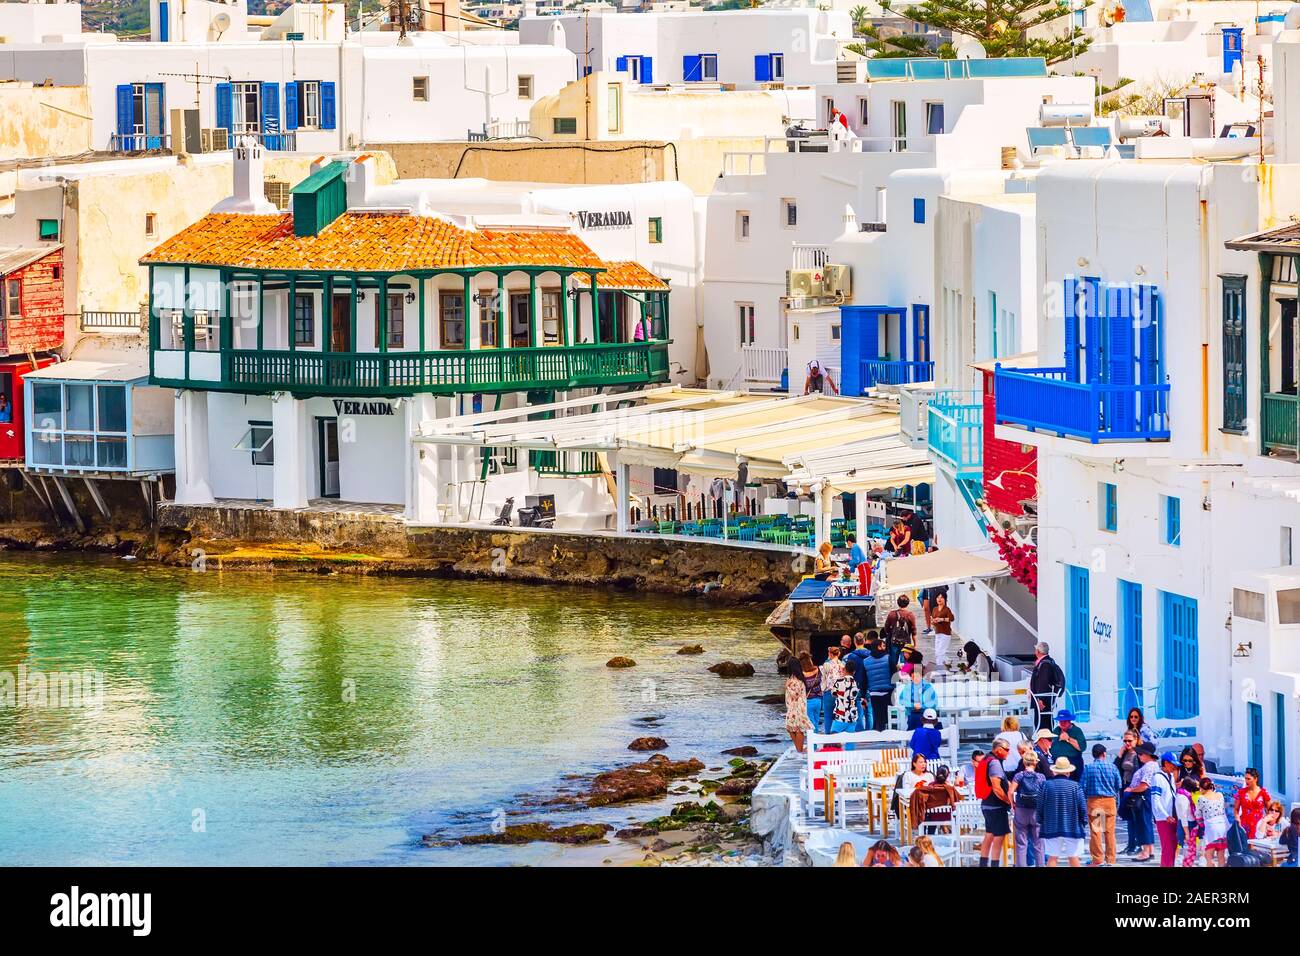 Mykonos, Greece - April 23, 2019: People, promenade with chairs and tables in typical greek tavern in Little Venice part of Mikonos town Stock Photo